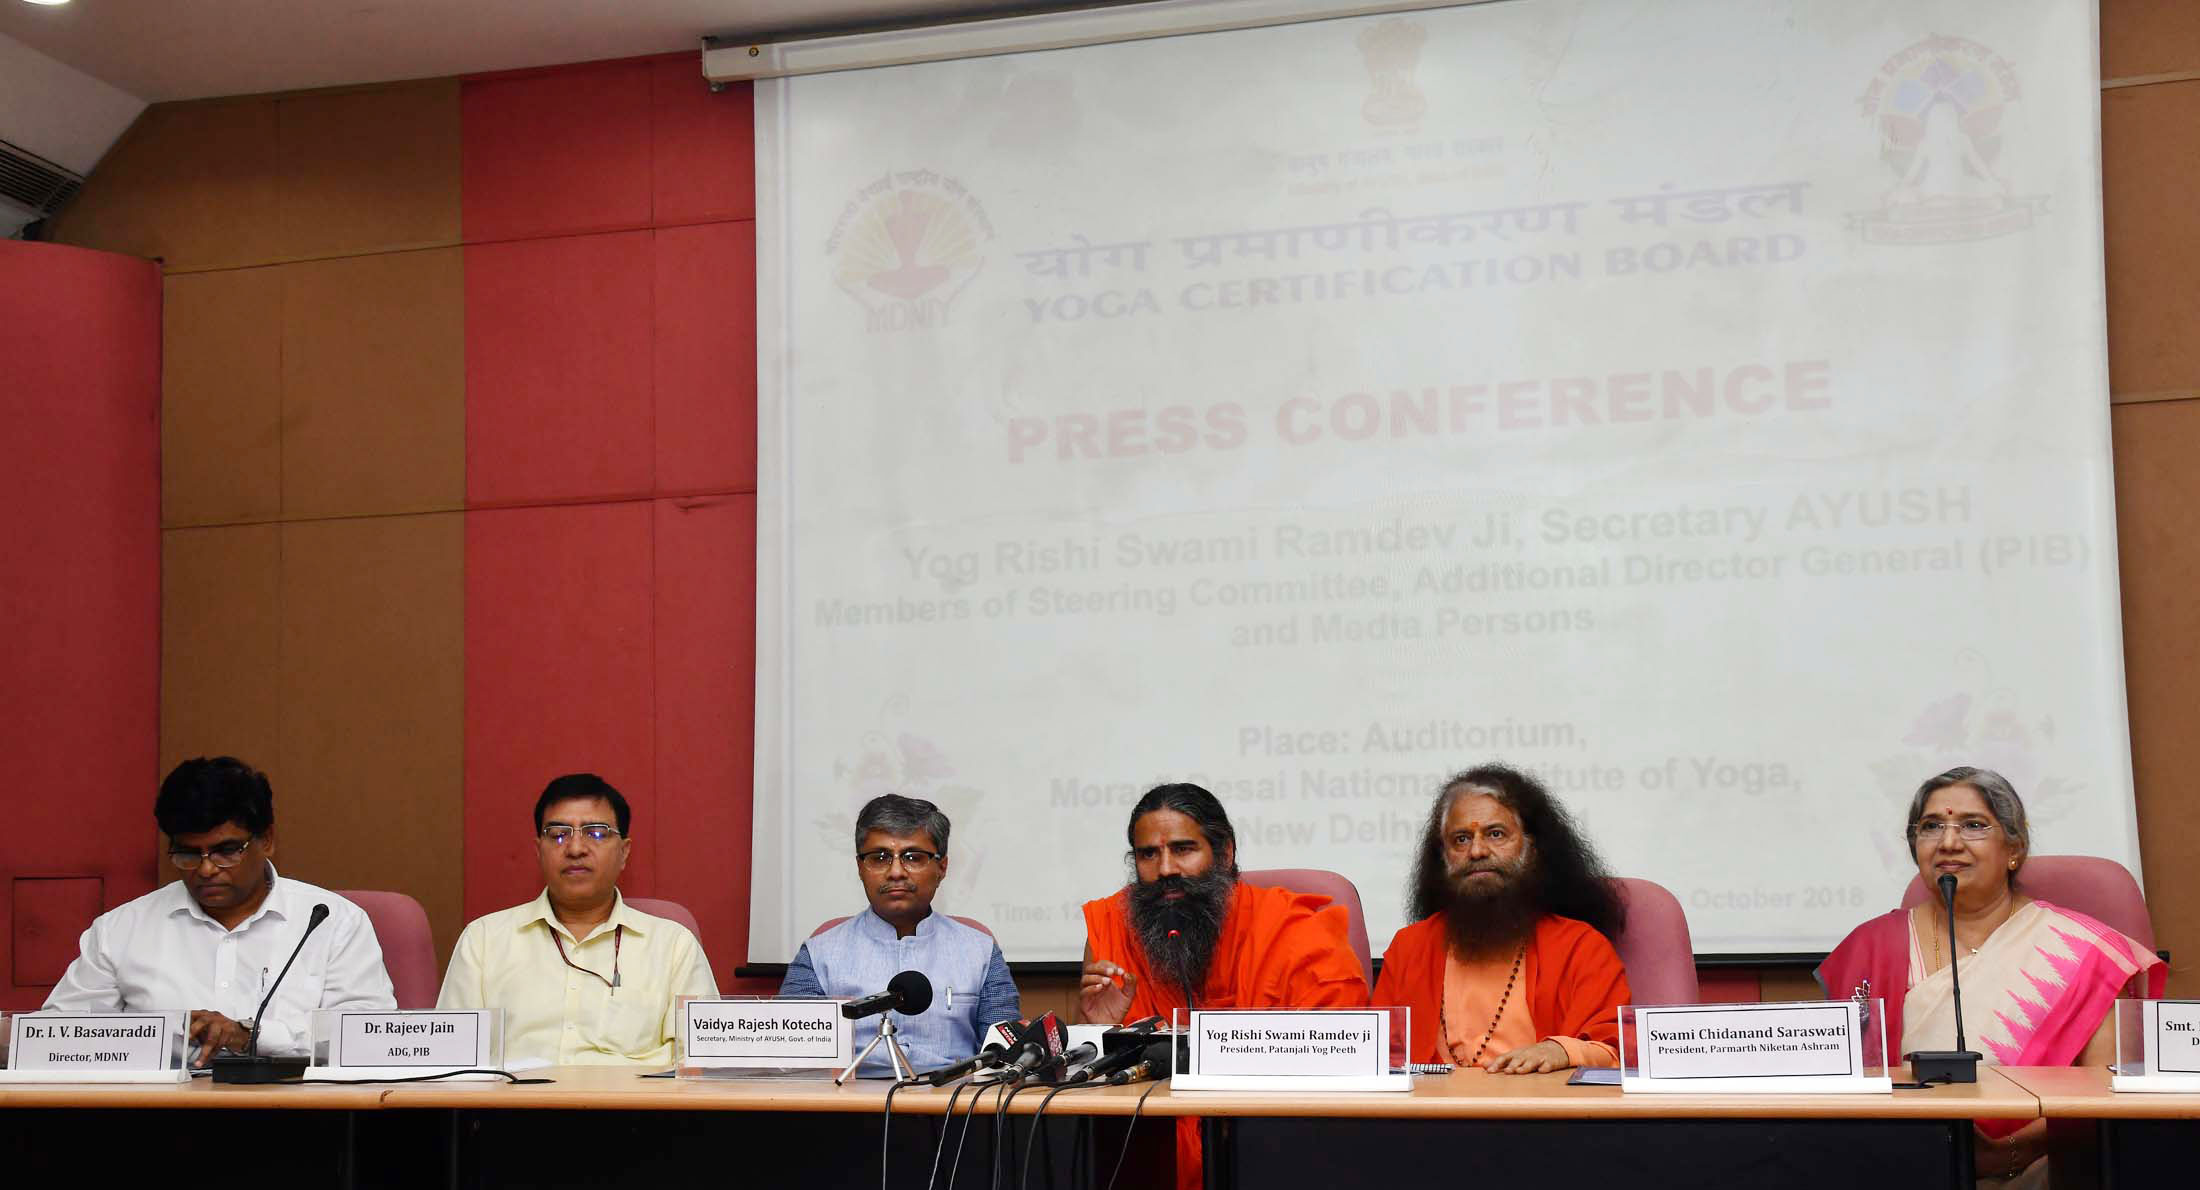 Meeting on Certification of Yoga Professionals and Accreditation of Yoga schools held at New Delhi